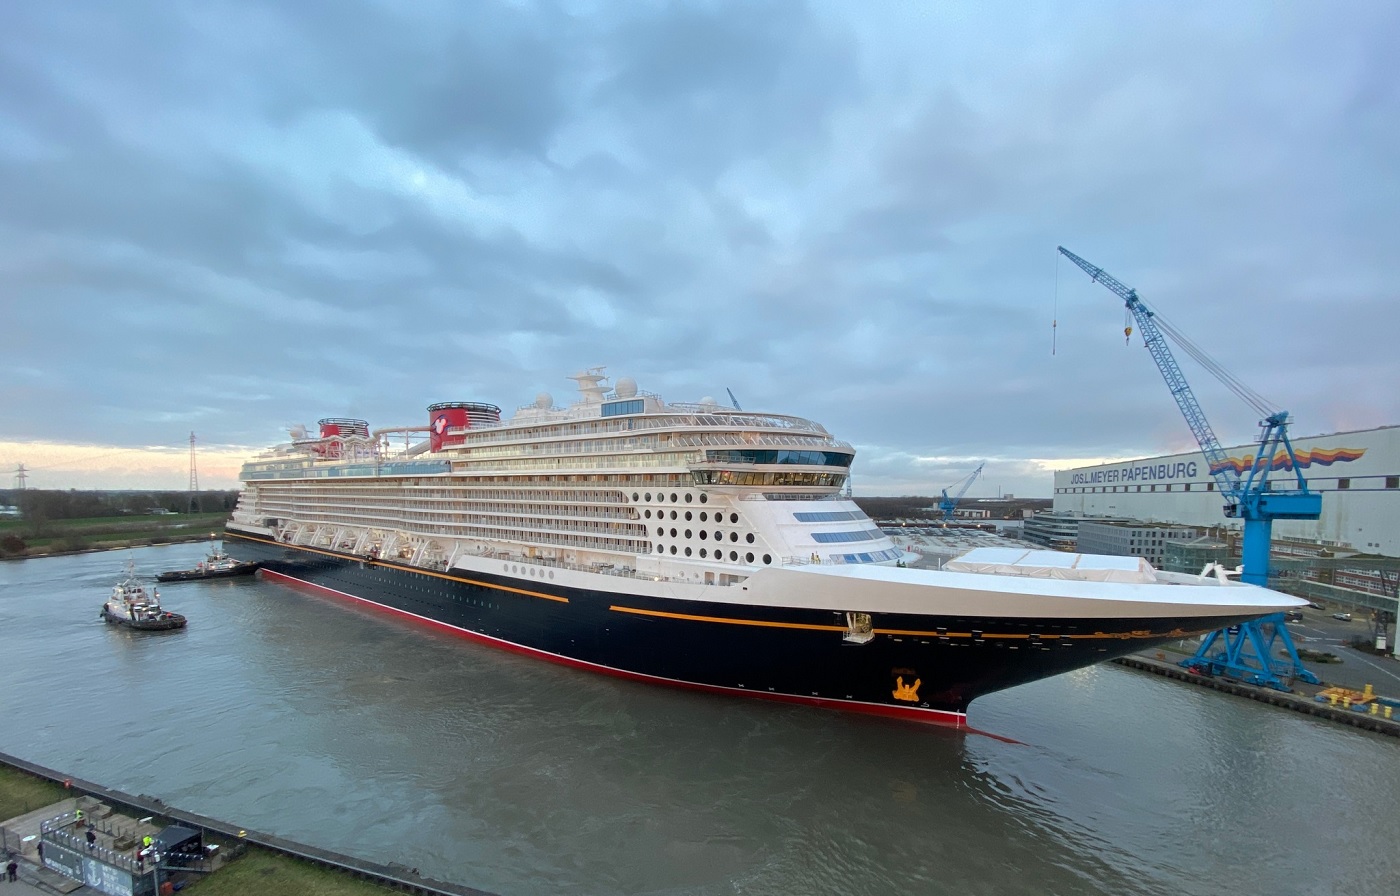 Disney Cruise Line's 1st LNG-fueled ship launched at Meyer Werft